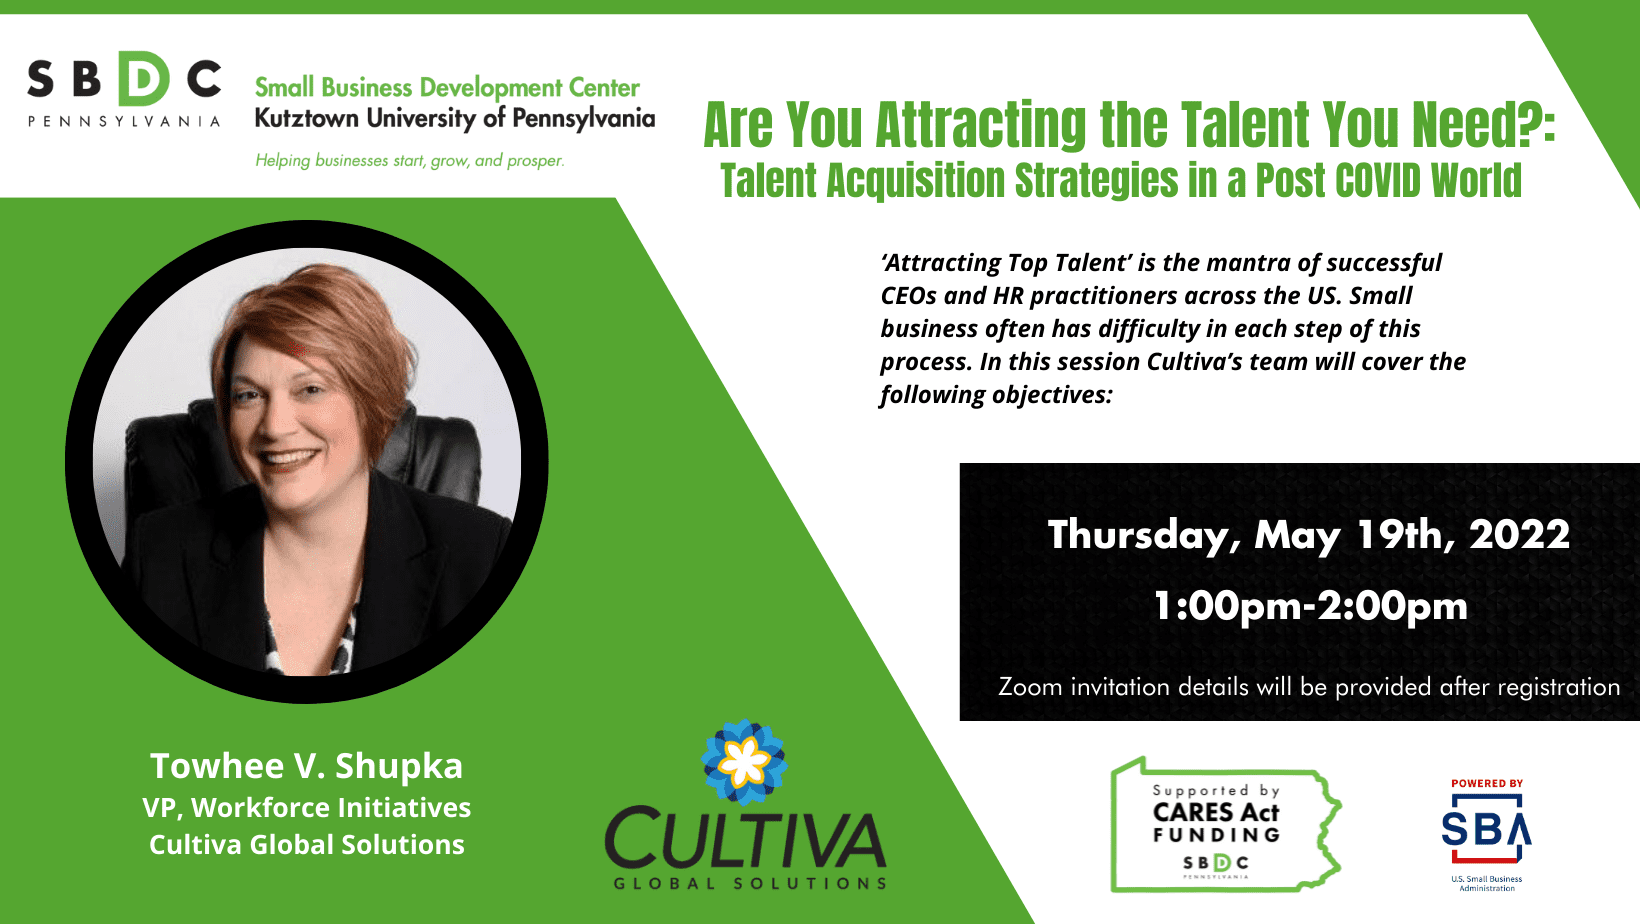 Are You Attracting the Talent You Need: Talent Acquisition Strategies in a Post COVID World